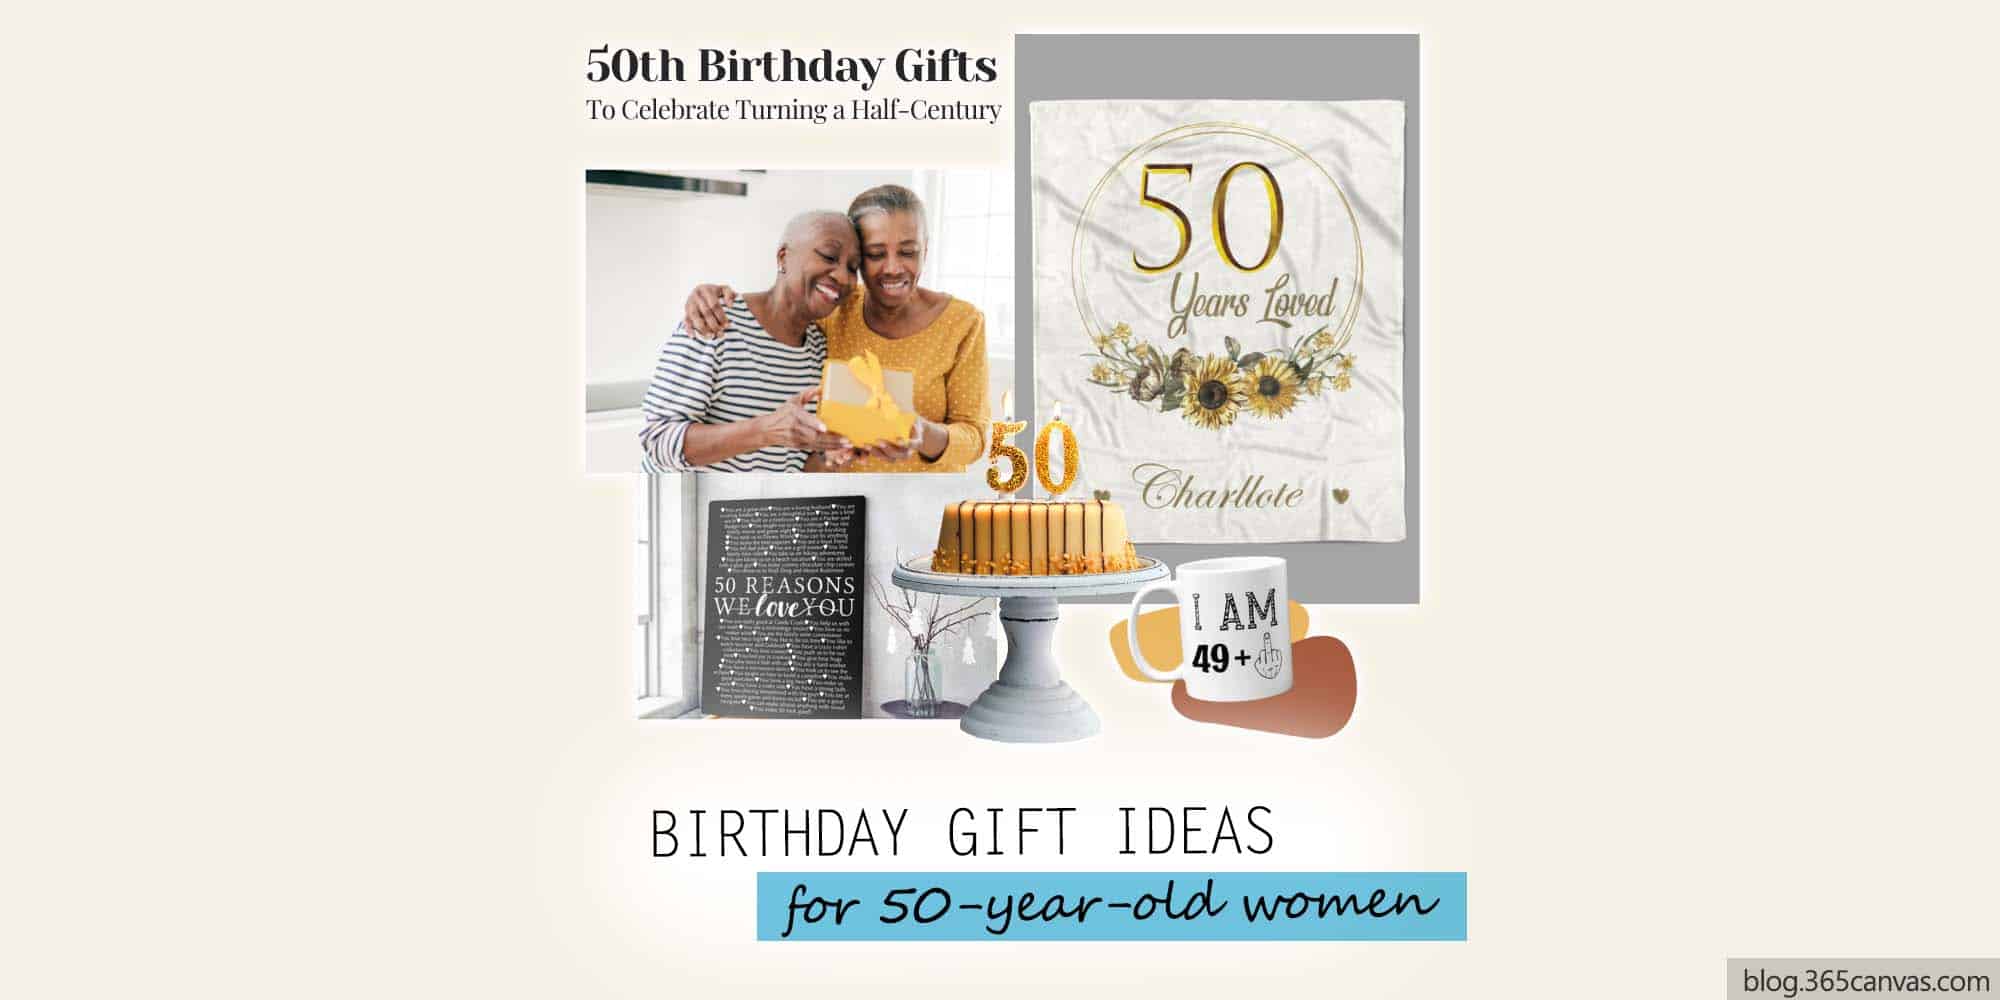 39 Best 50th Birthday Gift Ideas For Women To Celebrate Five Decades Of Life (2023)